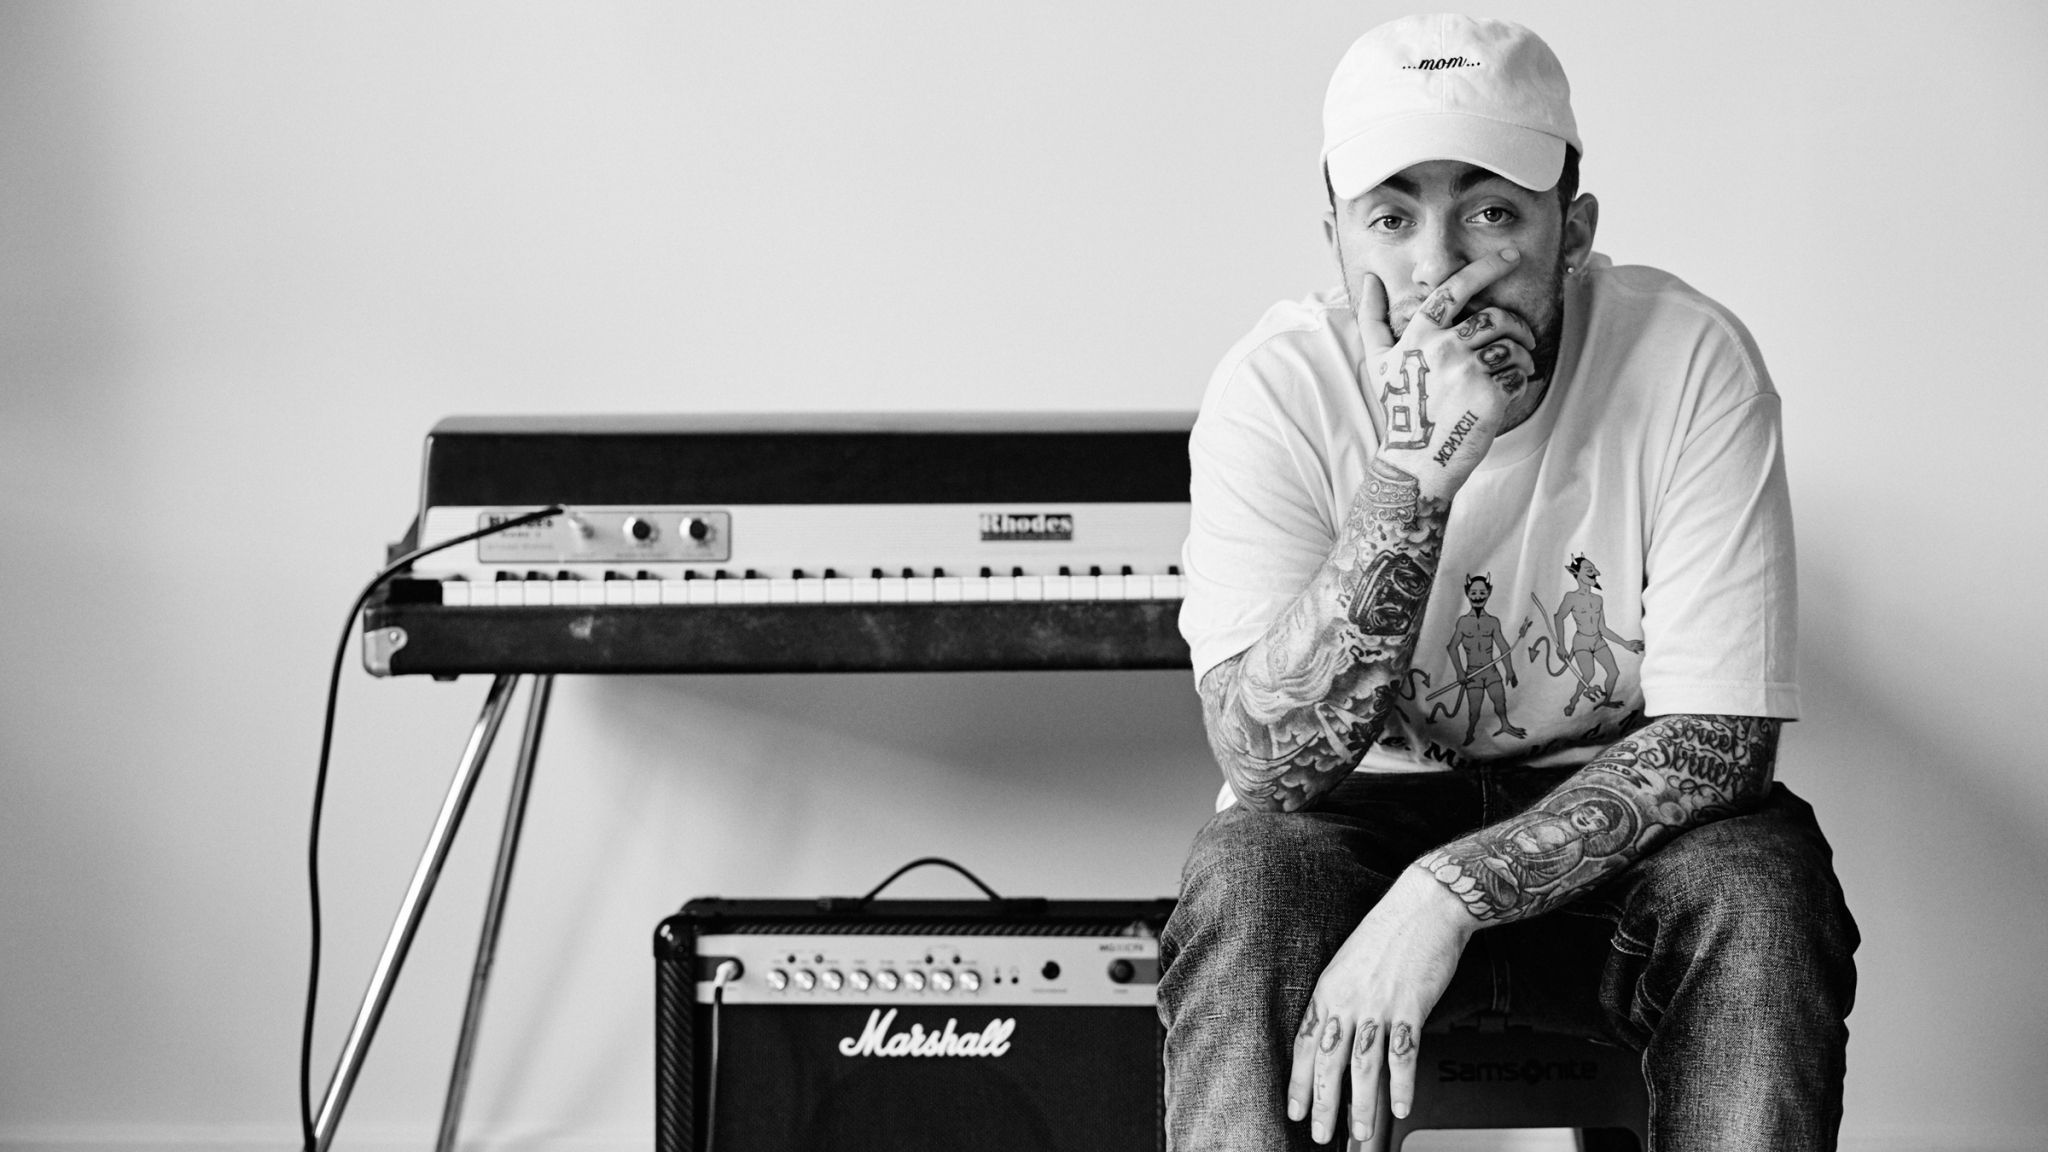 Mac Miller Wallpaper Image Photos Pictures Background